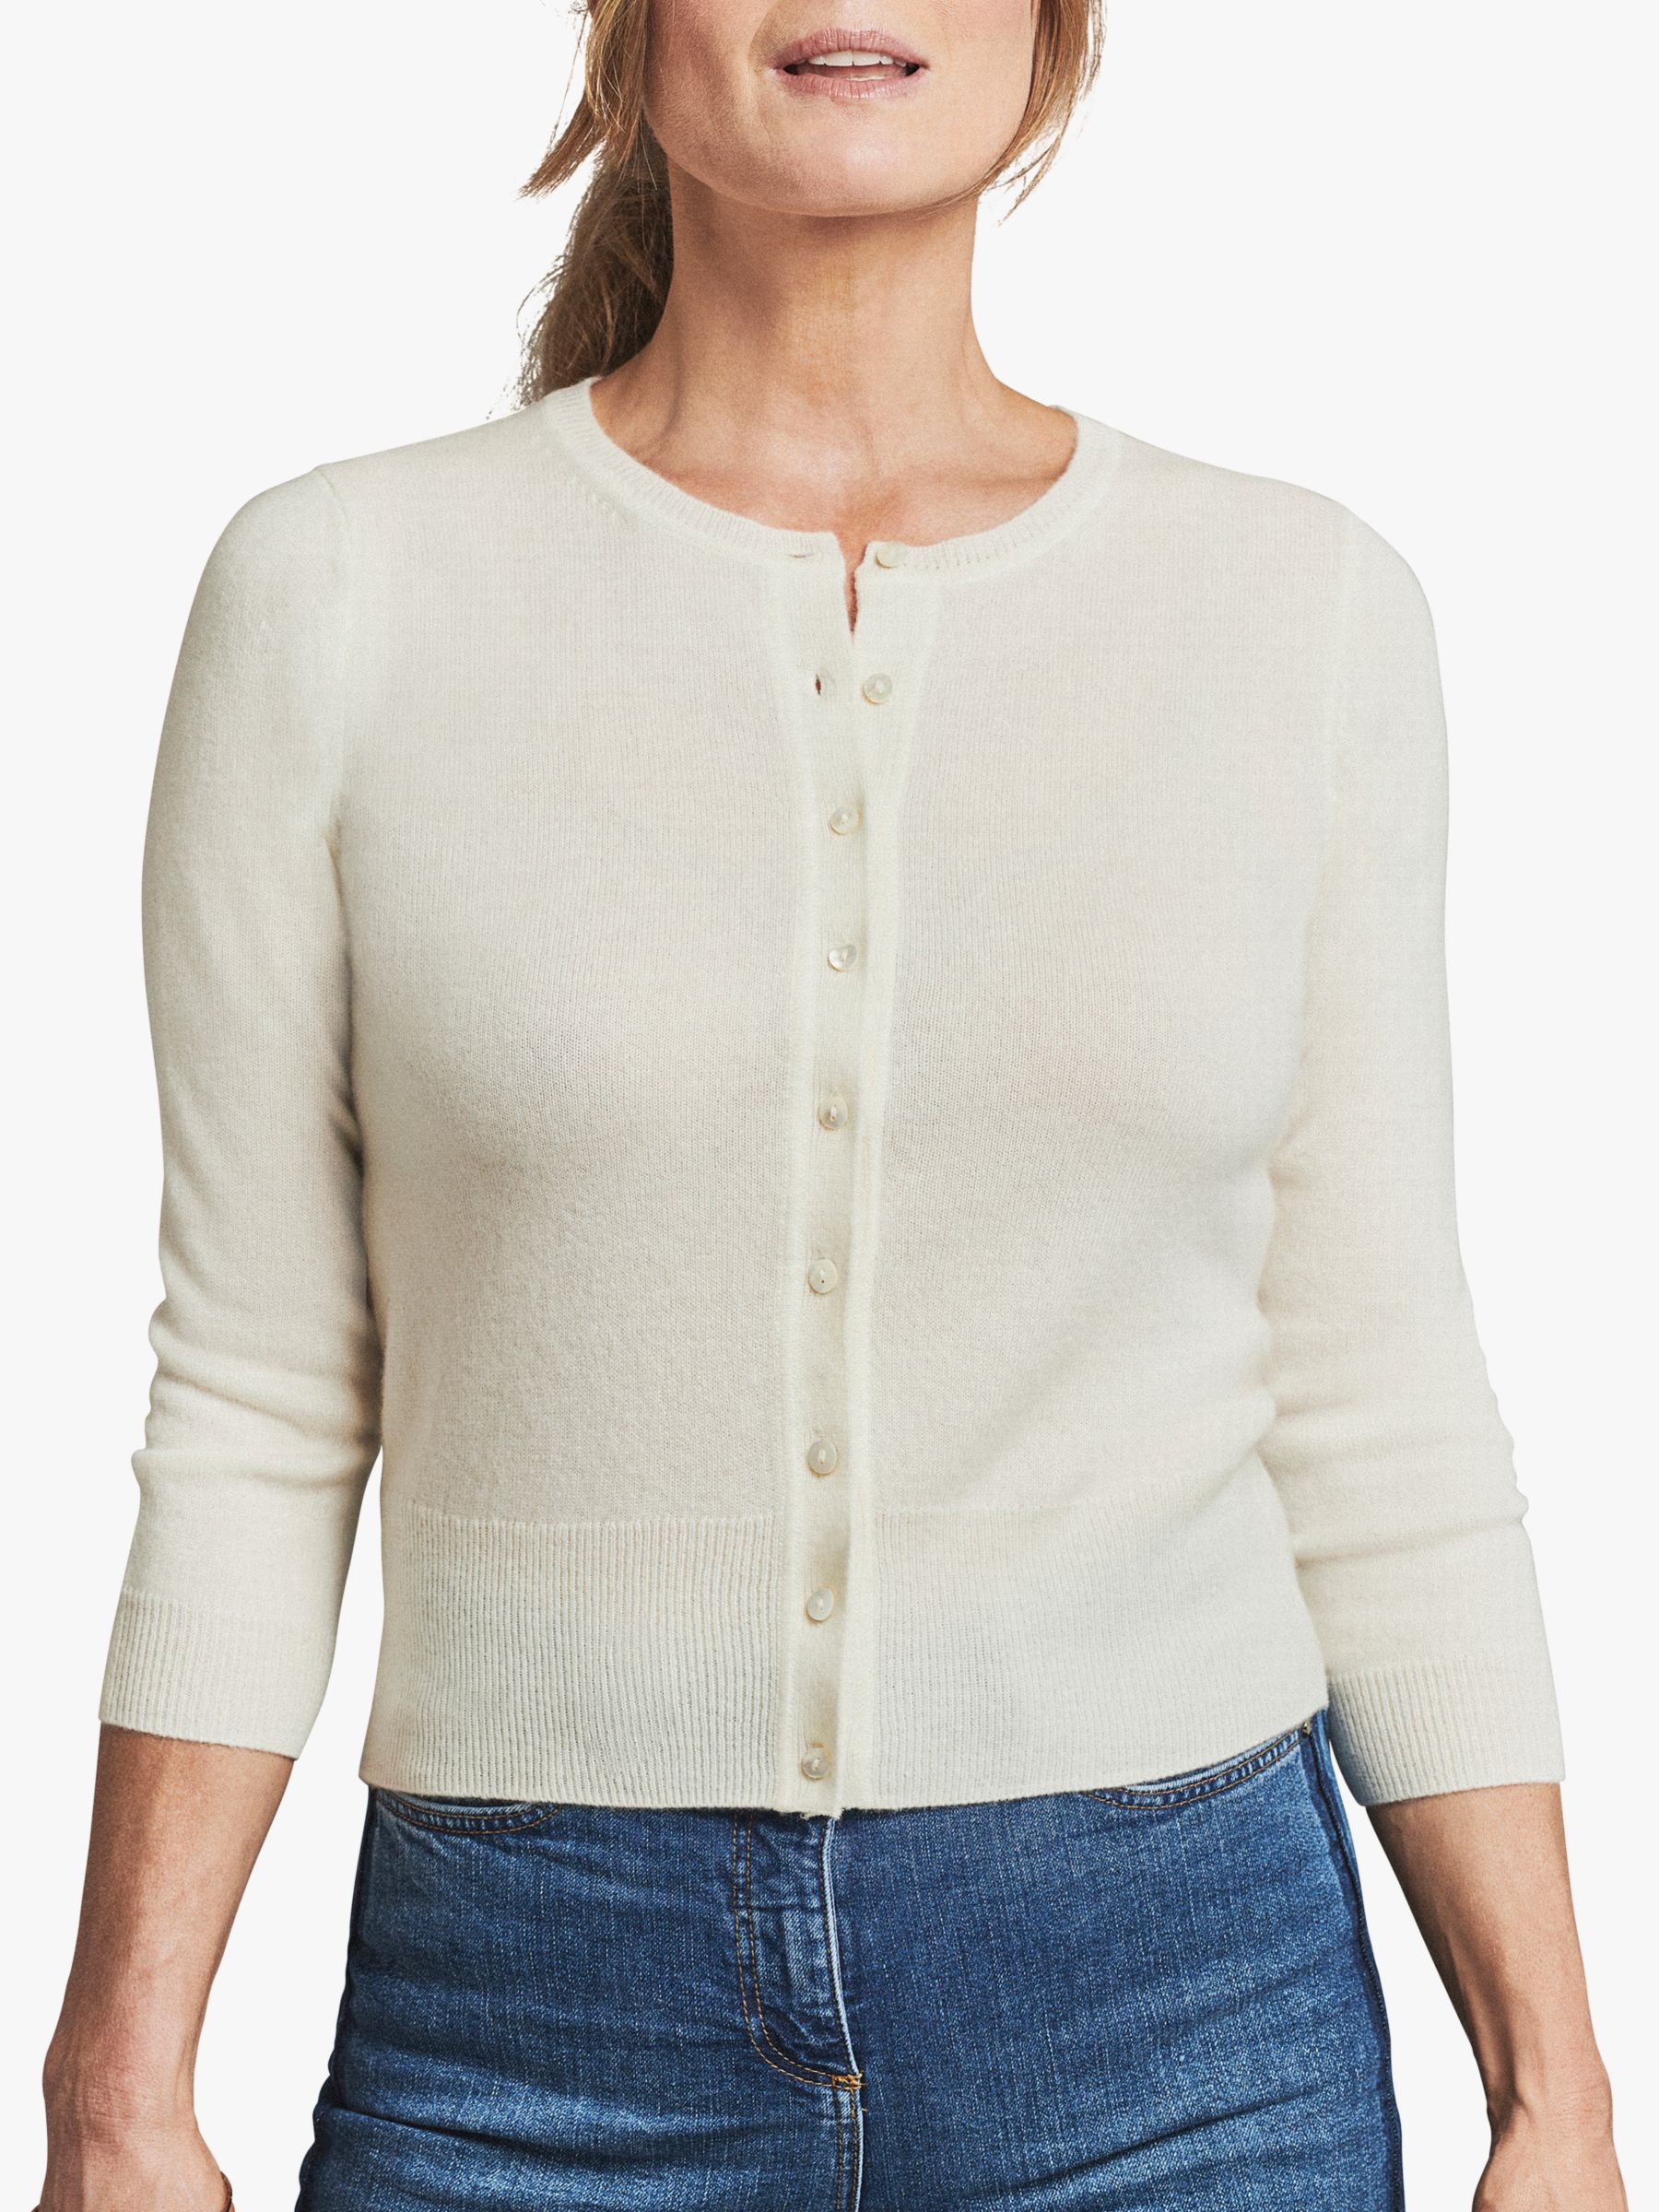 Soft White, Cashmere Cropped Cardigan